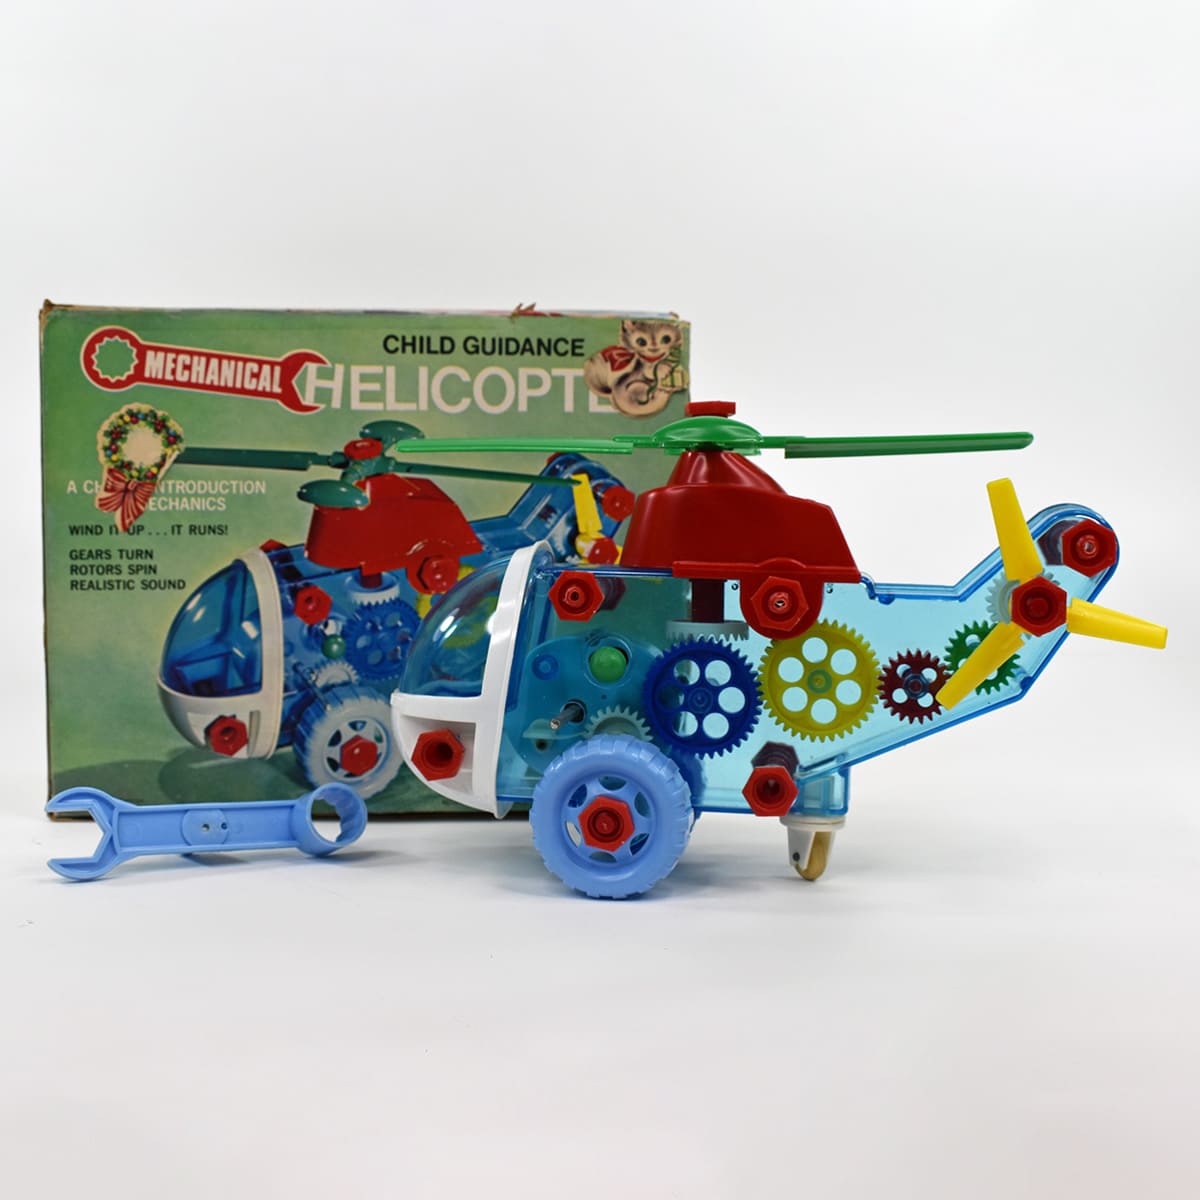 Child Guidance Mechanical Helicopter